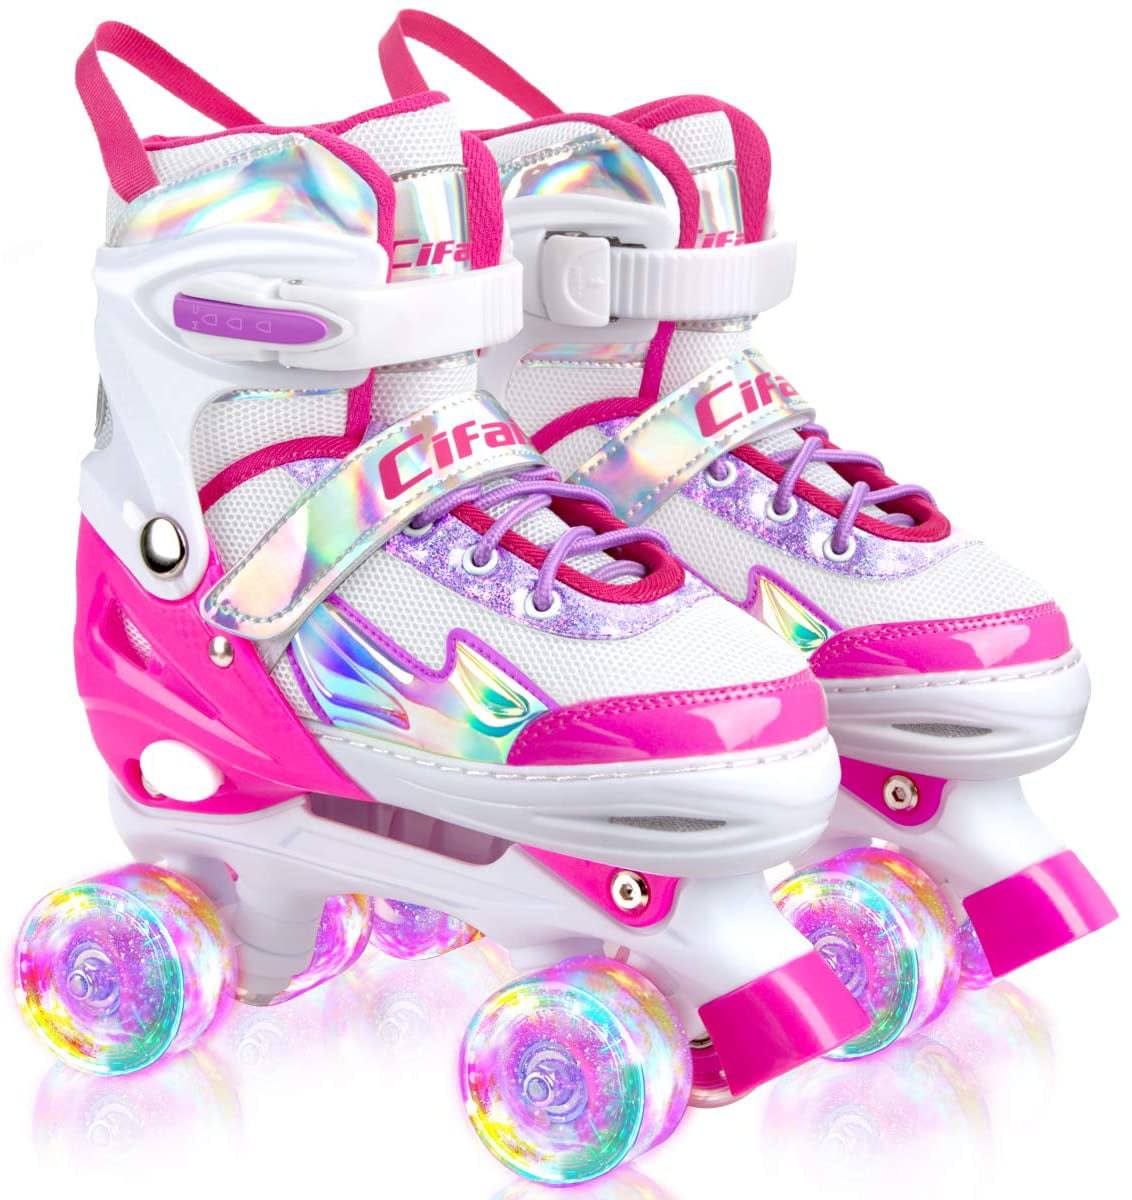 Marcent Roller Skates for Girls Boys Women Beginners Kids Adjustable Roller Skating with All Light up Wheels Indoor and Outdoor Pink/Purple